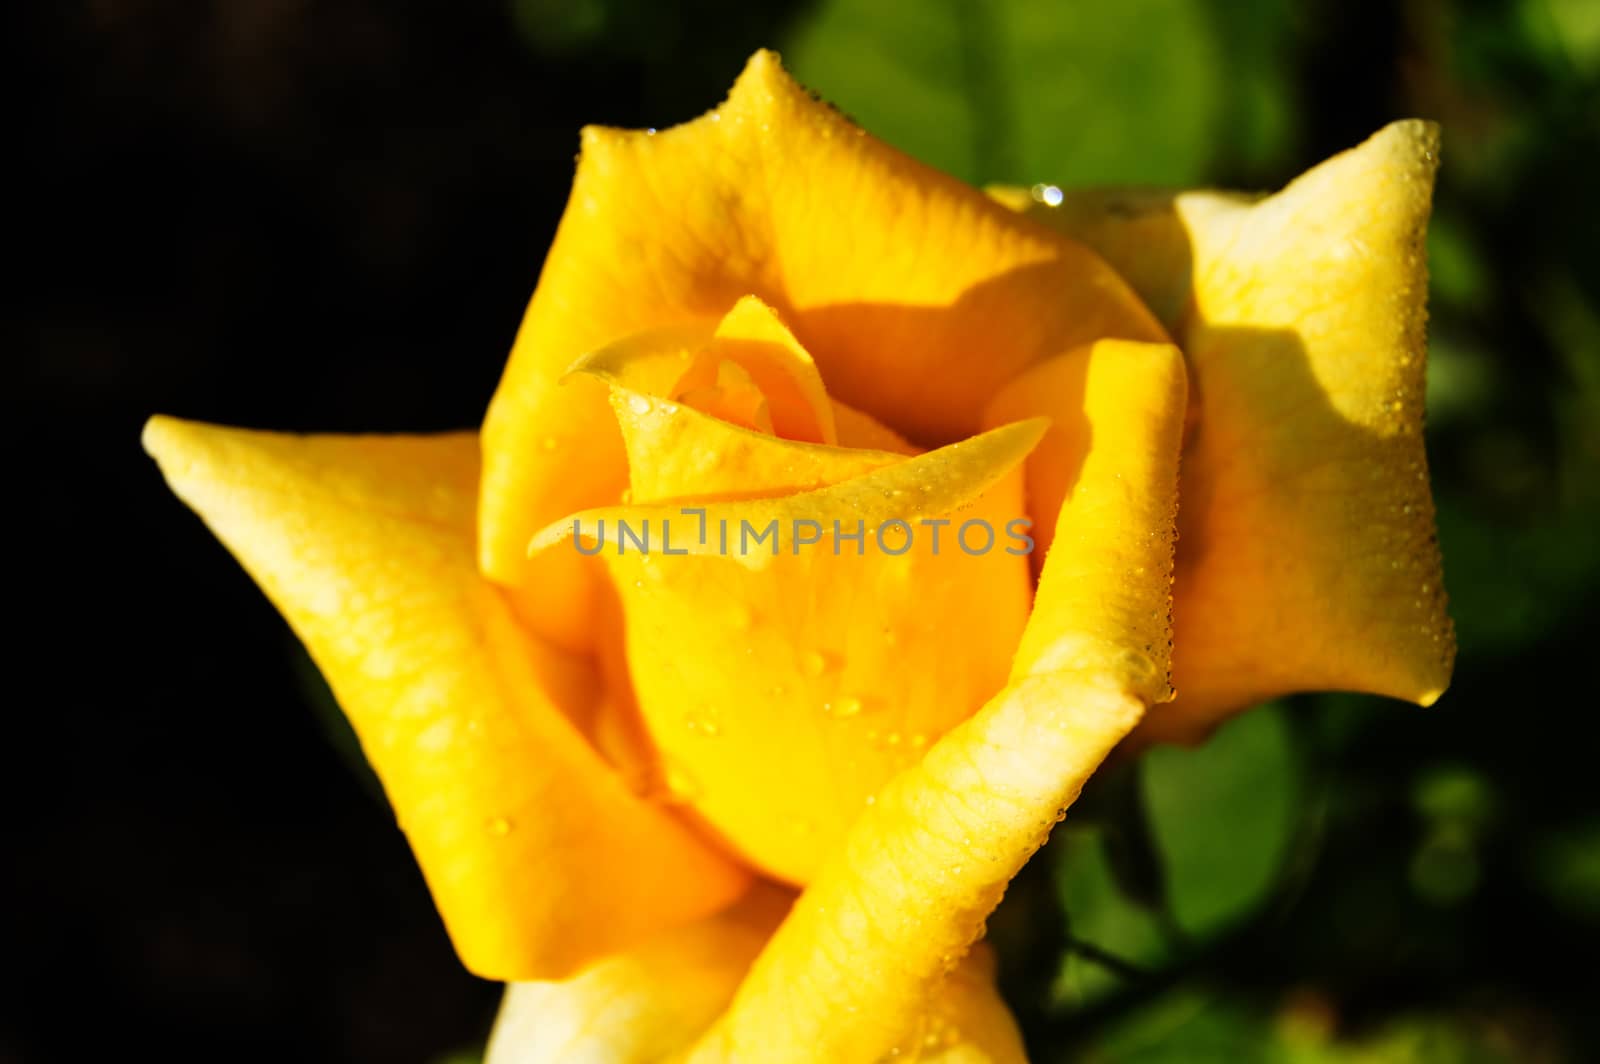 Beautiful yellow rose blooms in the garden on black background, greeting card concept, bright sunlight by claire_lucia